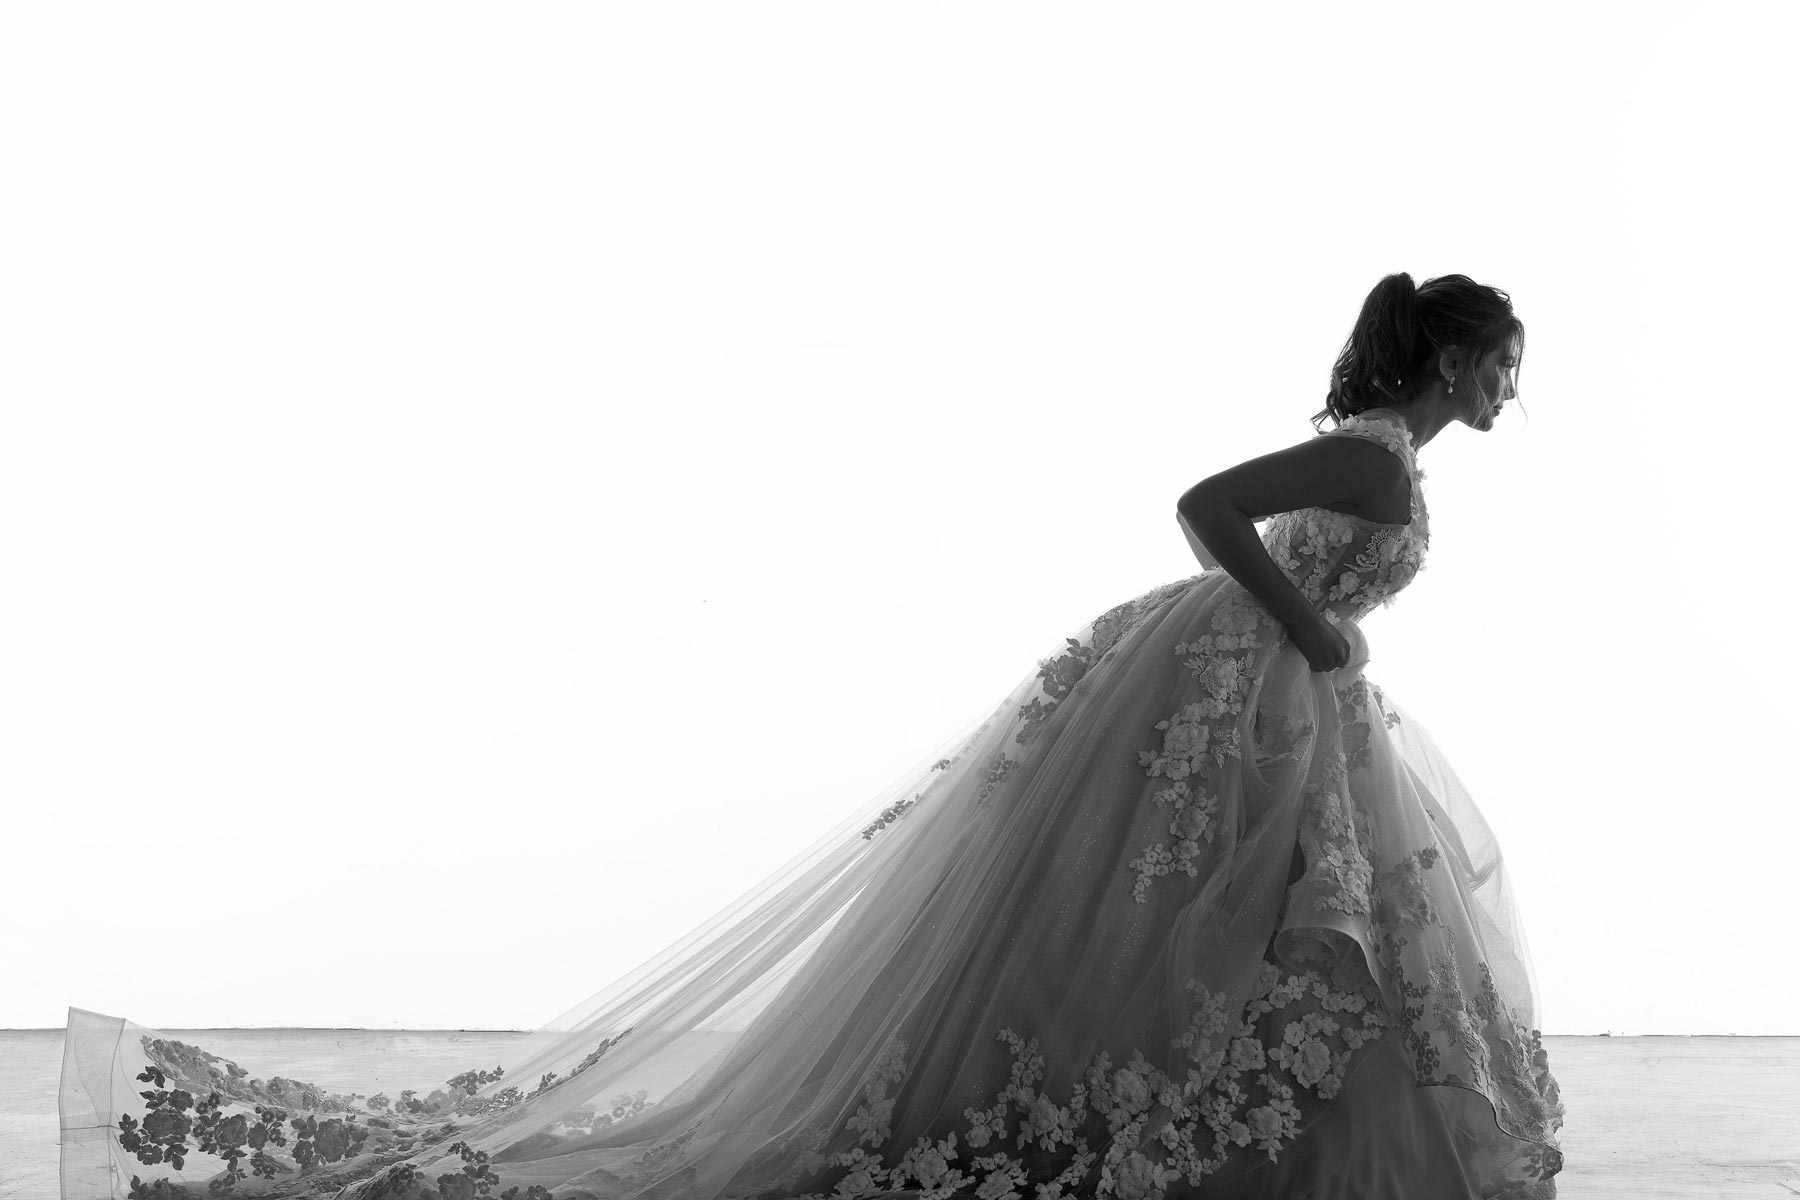 Ball gown wedding dresses explained